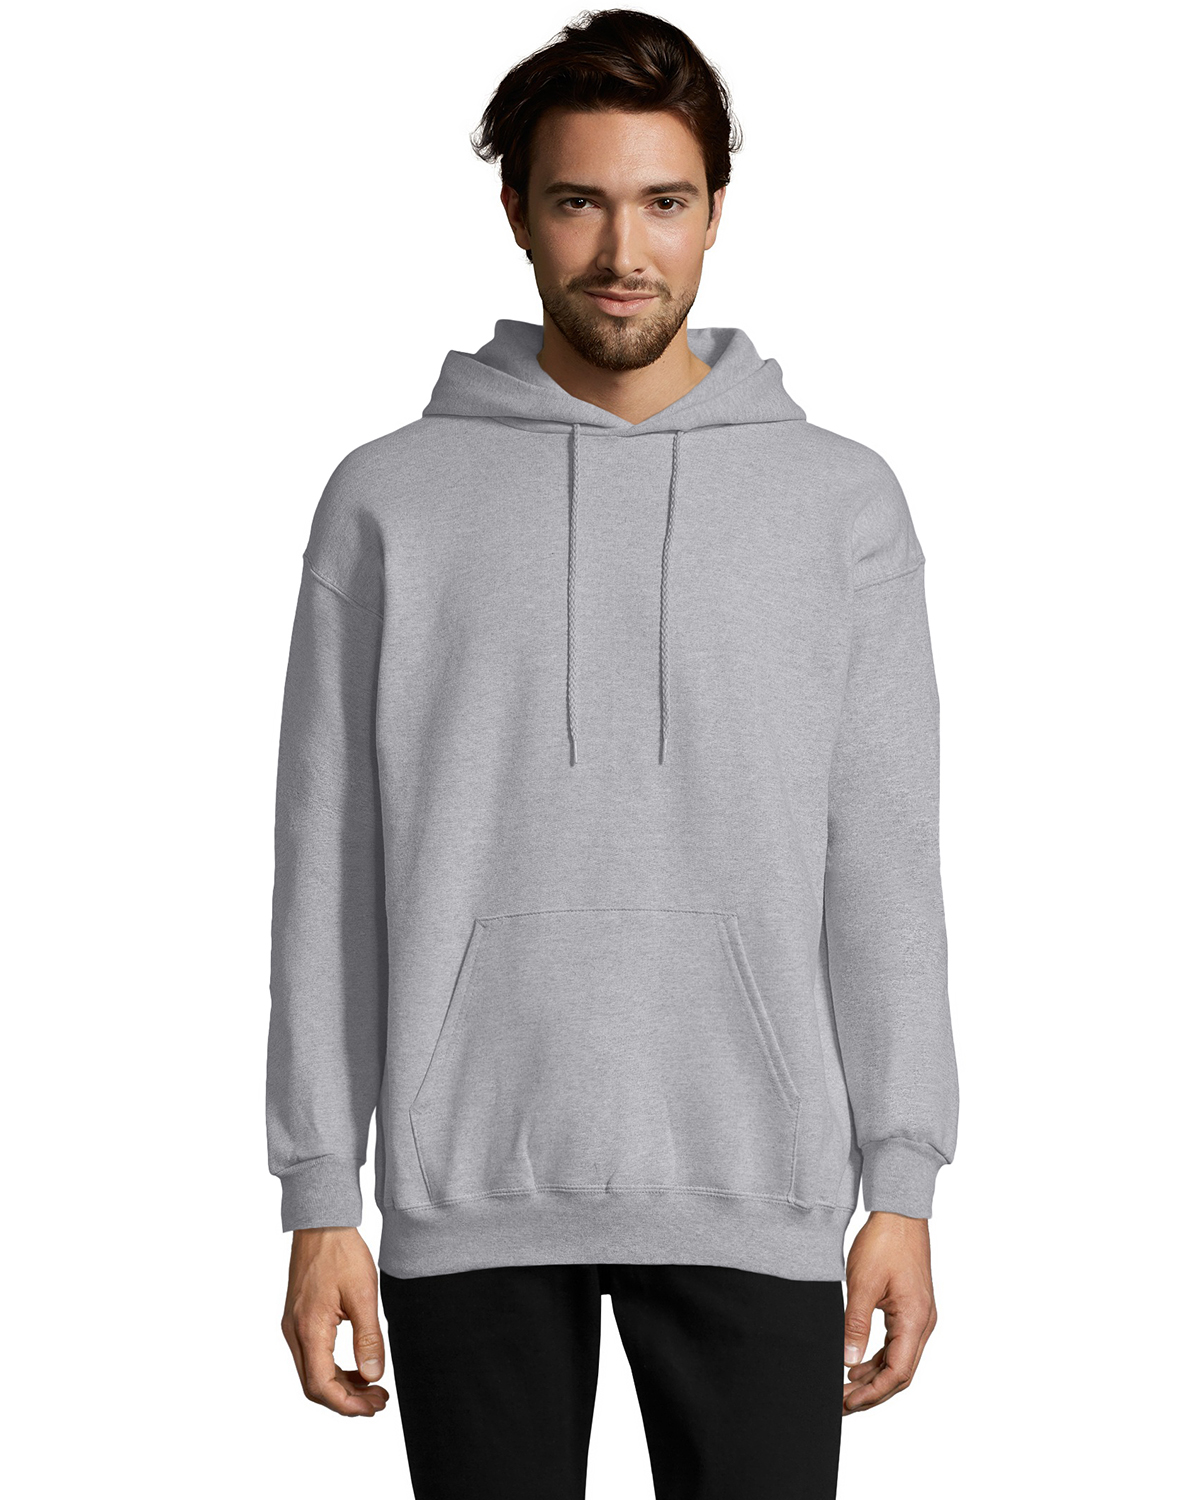 Hanes F170 White 9.7 oz. Ultimate Cotton® 90/10 Pullover Hoodie 